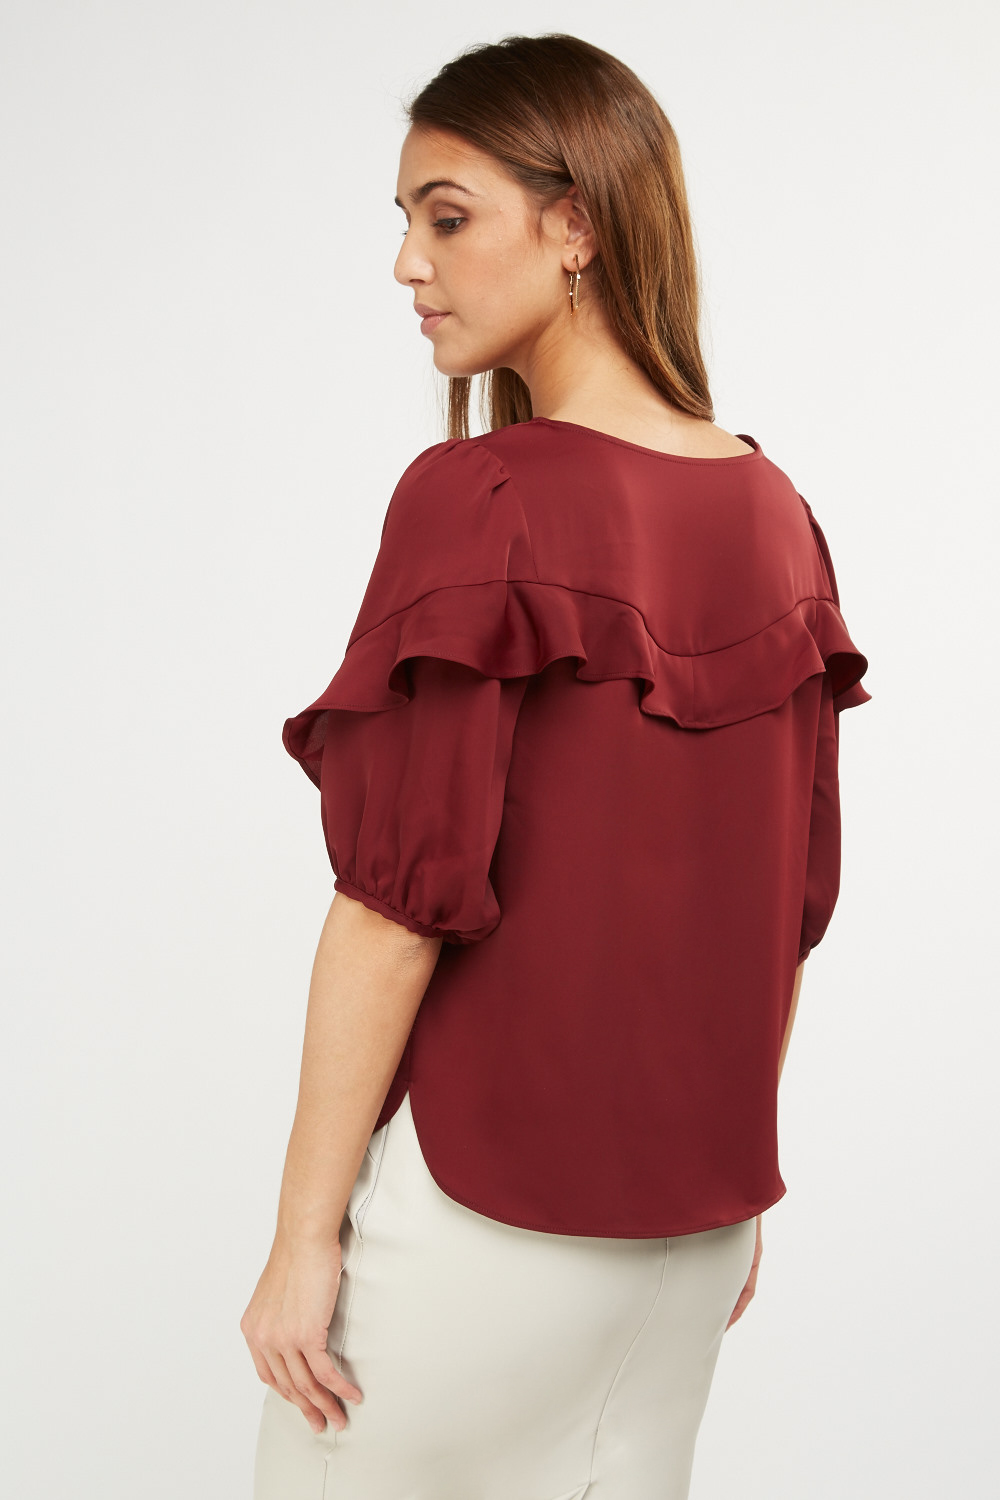 Frilly Bishop Sleeve Top - Just $7